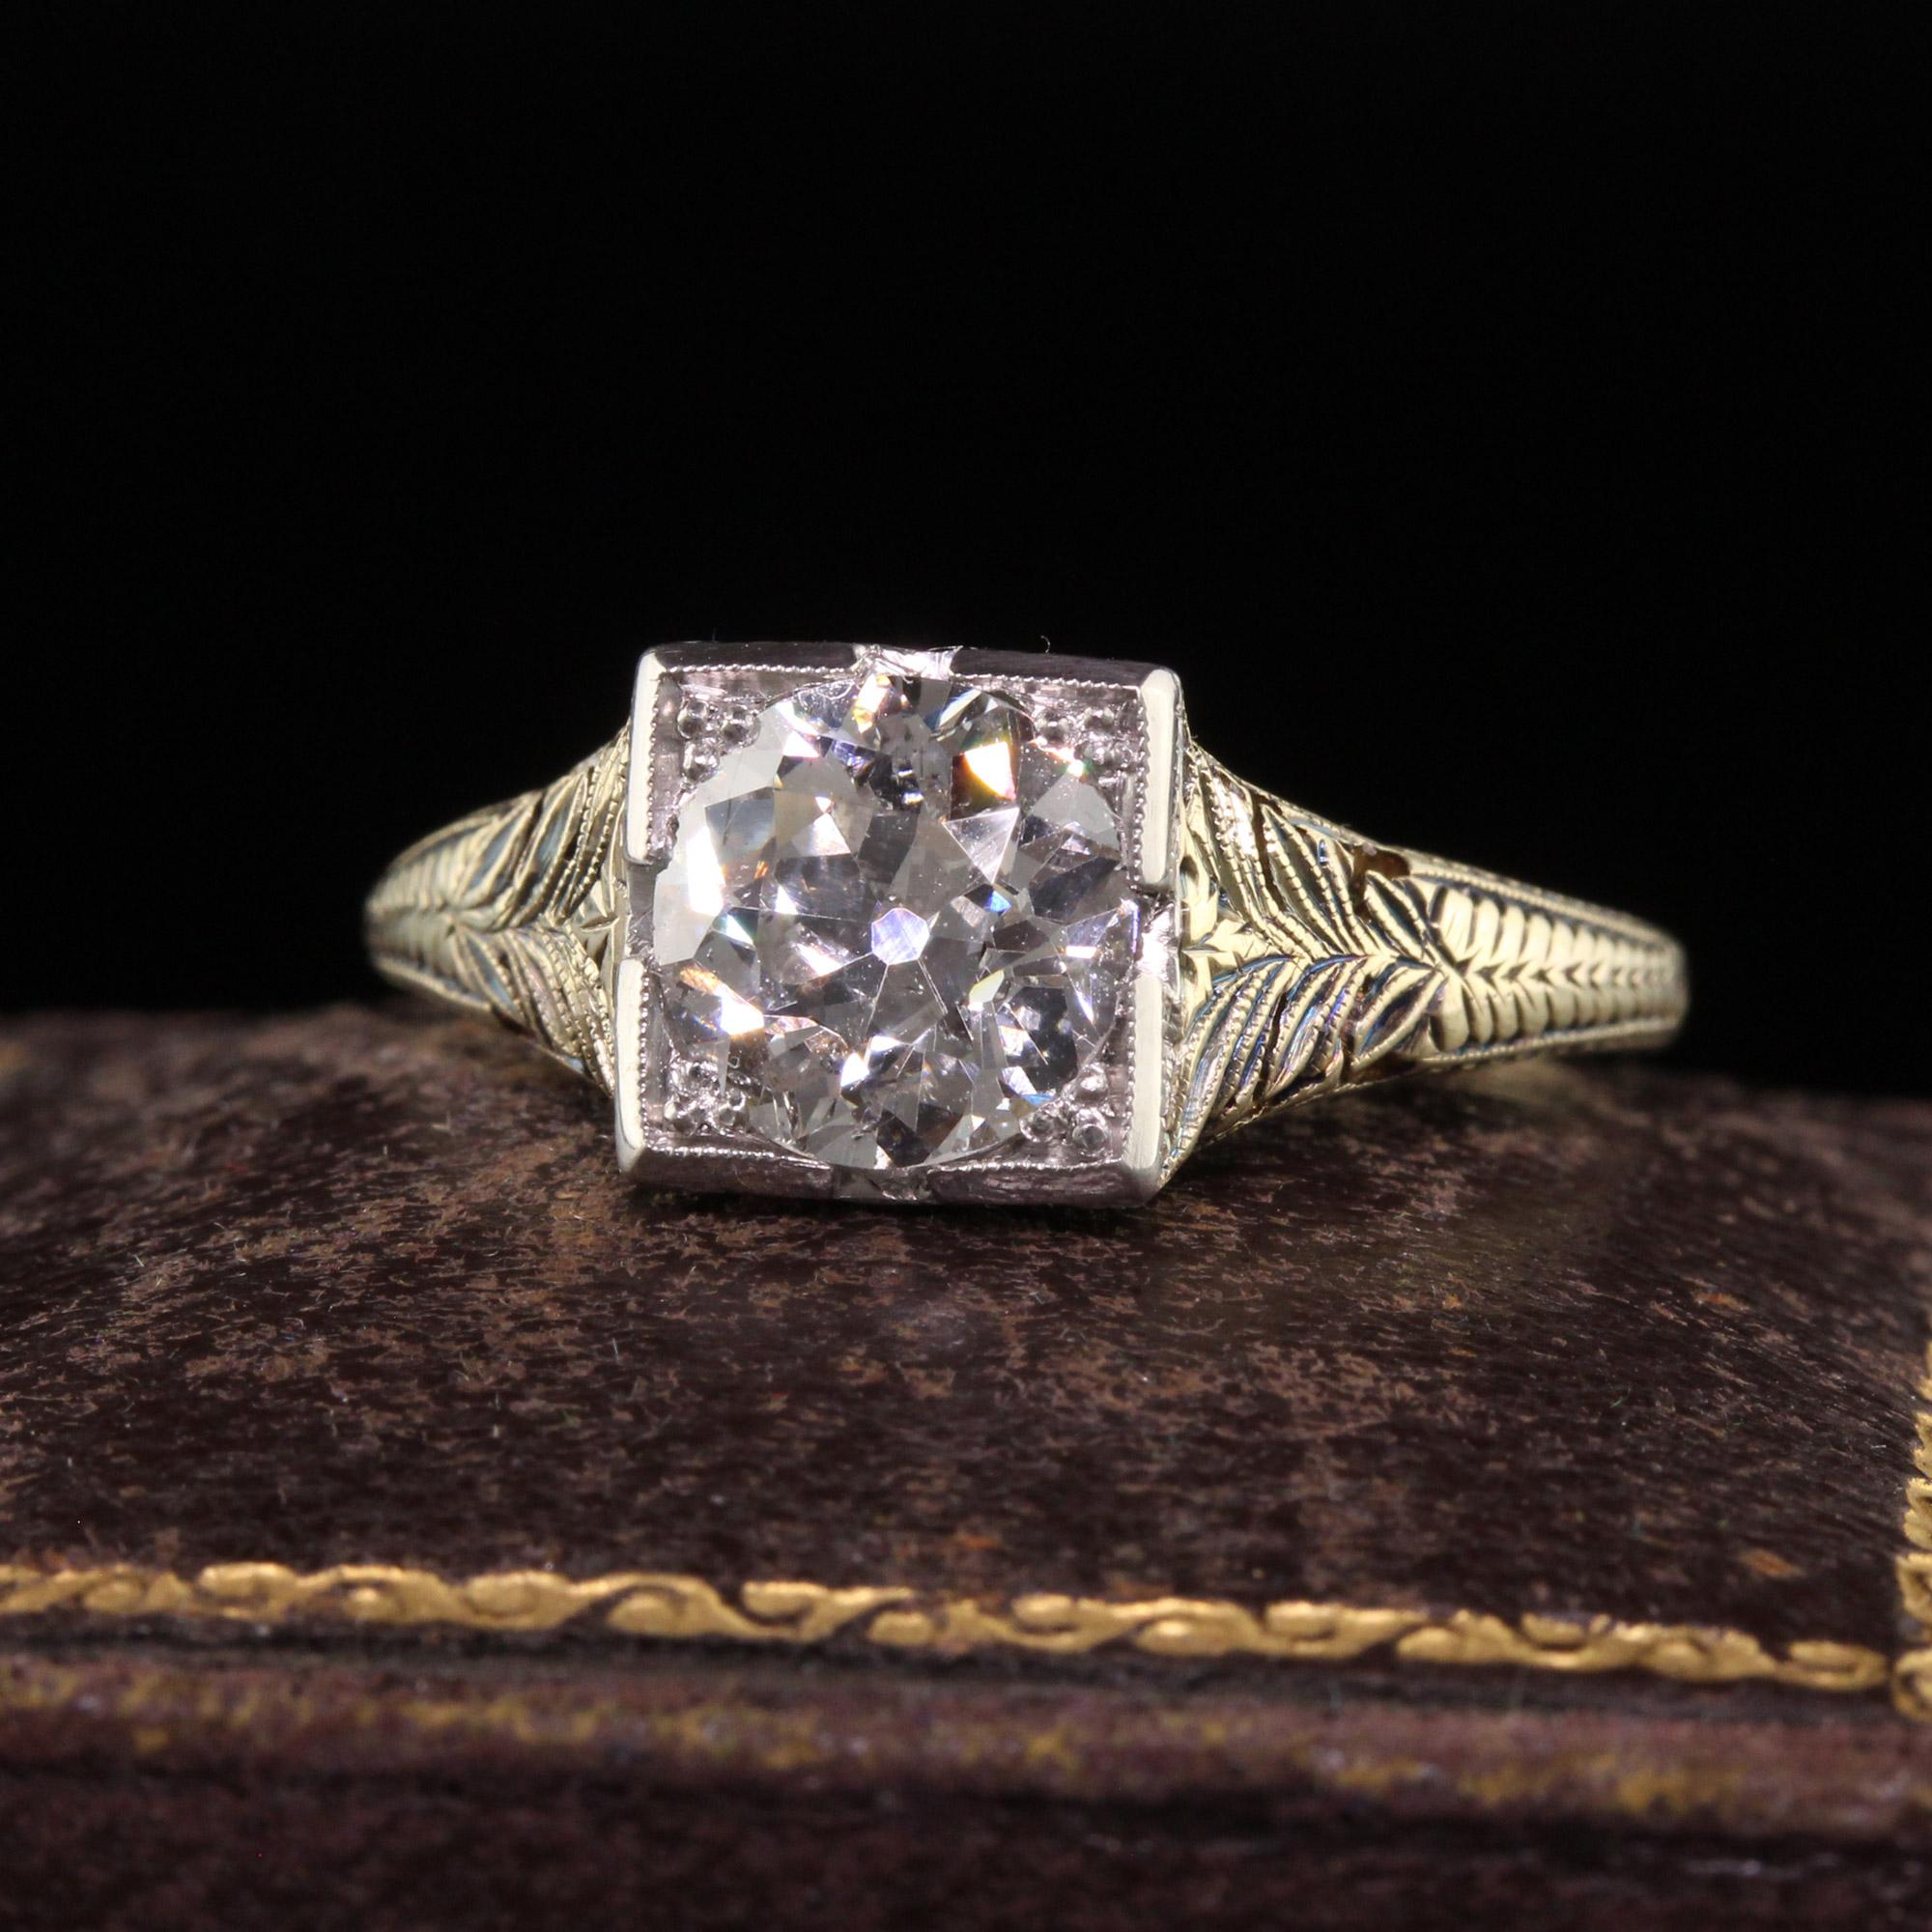 Beautiful Antique Art Deco 14K Yellow Gold Filigree Old Euro Diamond Engagement Ring - GIA. This incredible engagement ring is crafted in 14k yellow gold and platinum top. The ring holds an old european cut diamond that has a GIA report. The